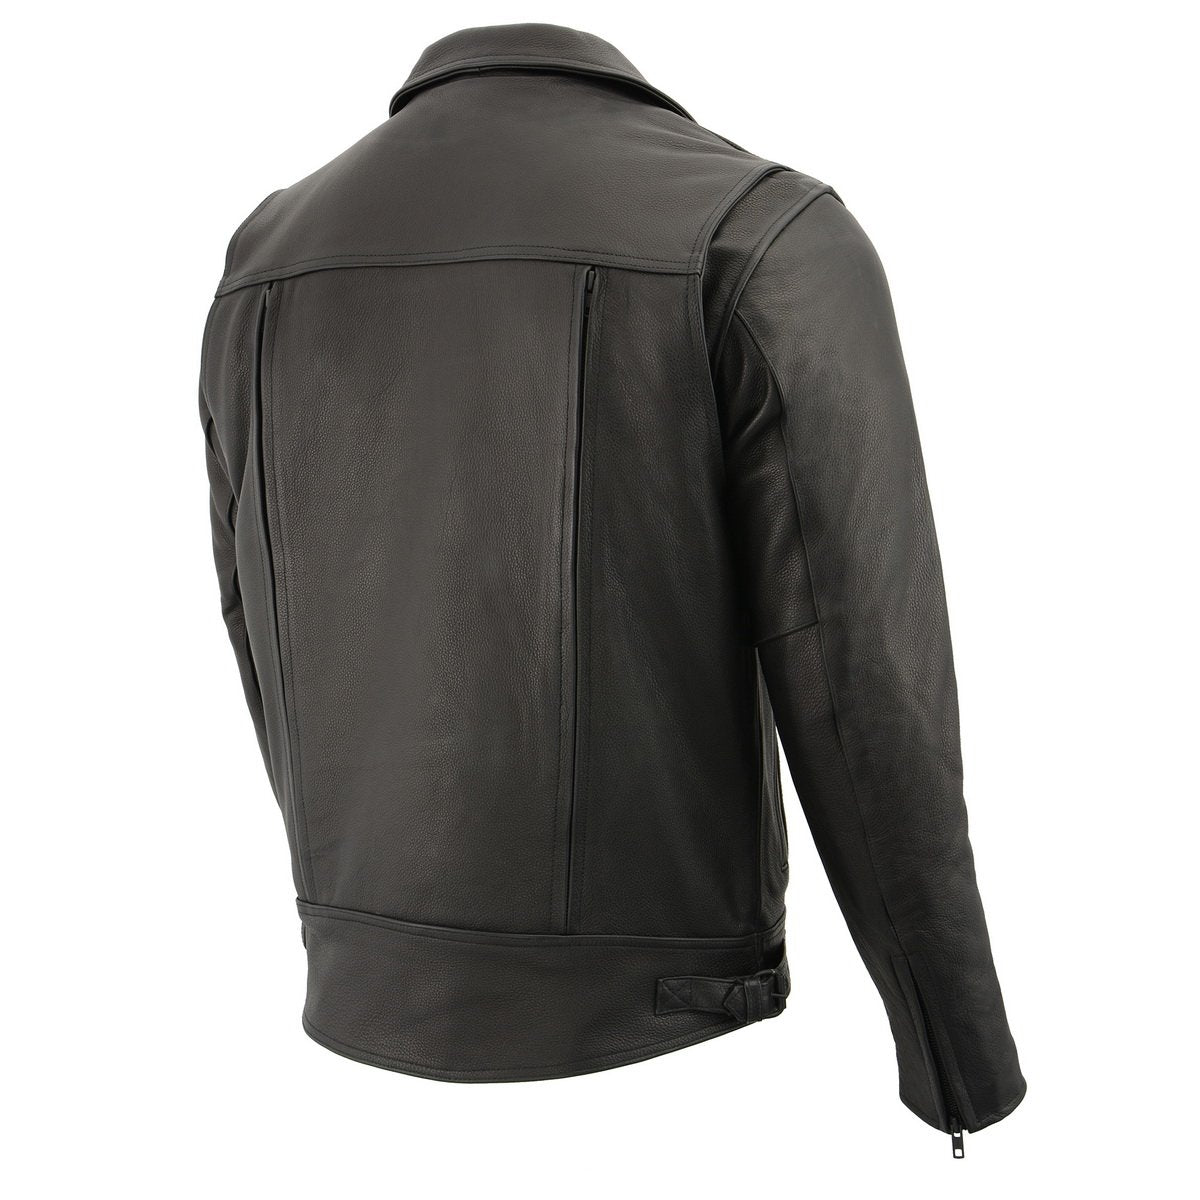 Milwaukee Leather LKM1720T Men's 'Tall Sizes' Black Vented Leather Jacket with Utility Pockets